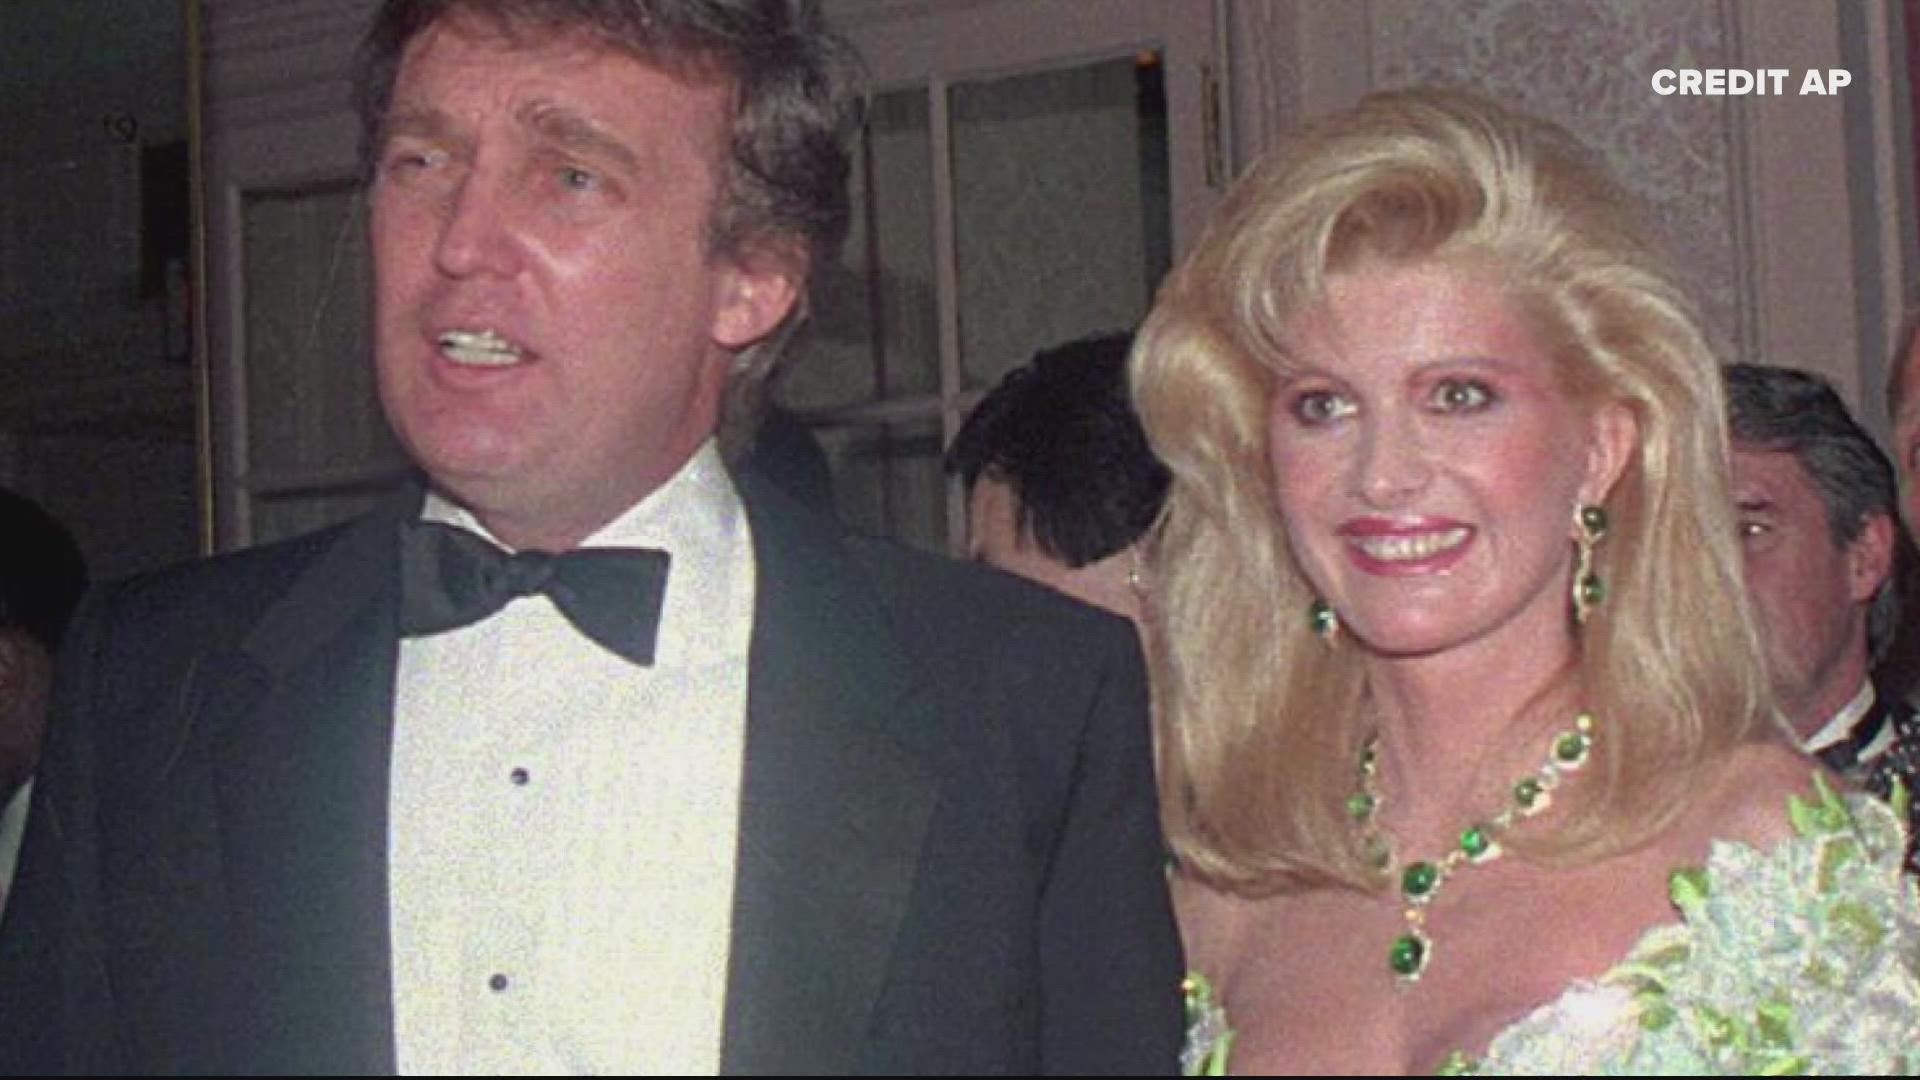 The Trump family says the former president's first wife, Ivana Trump, has died in New York City.